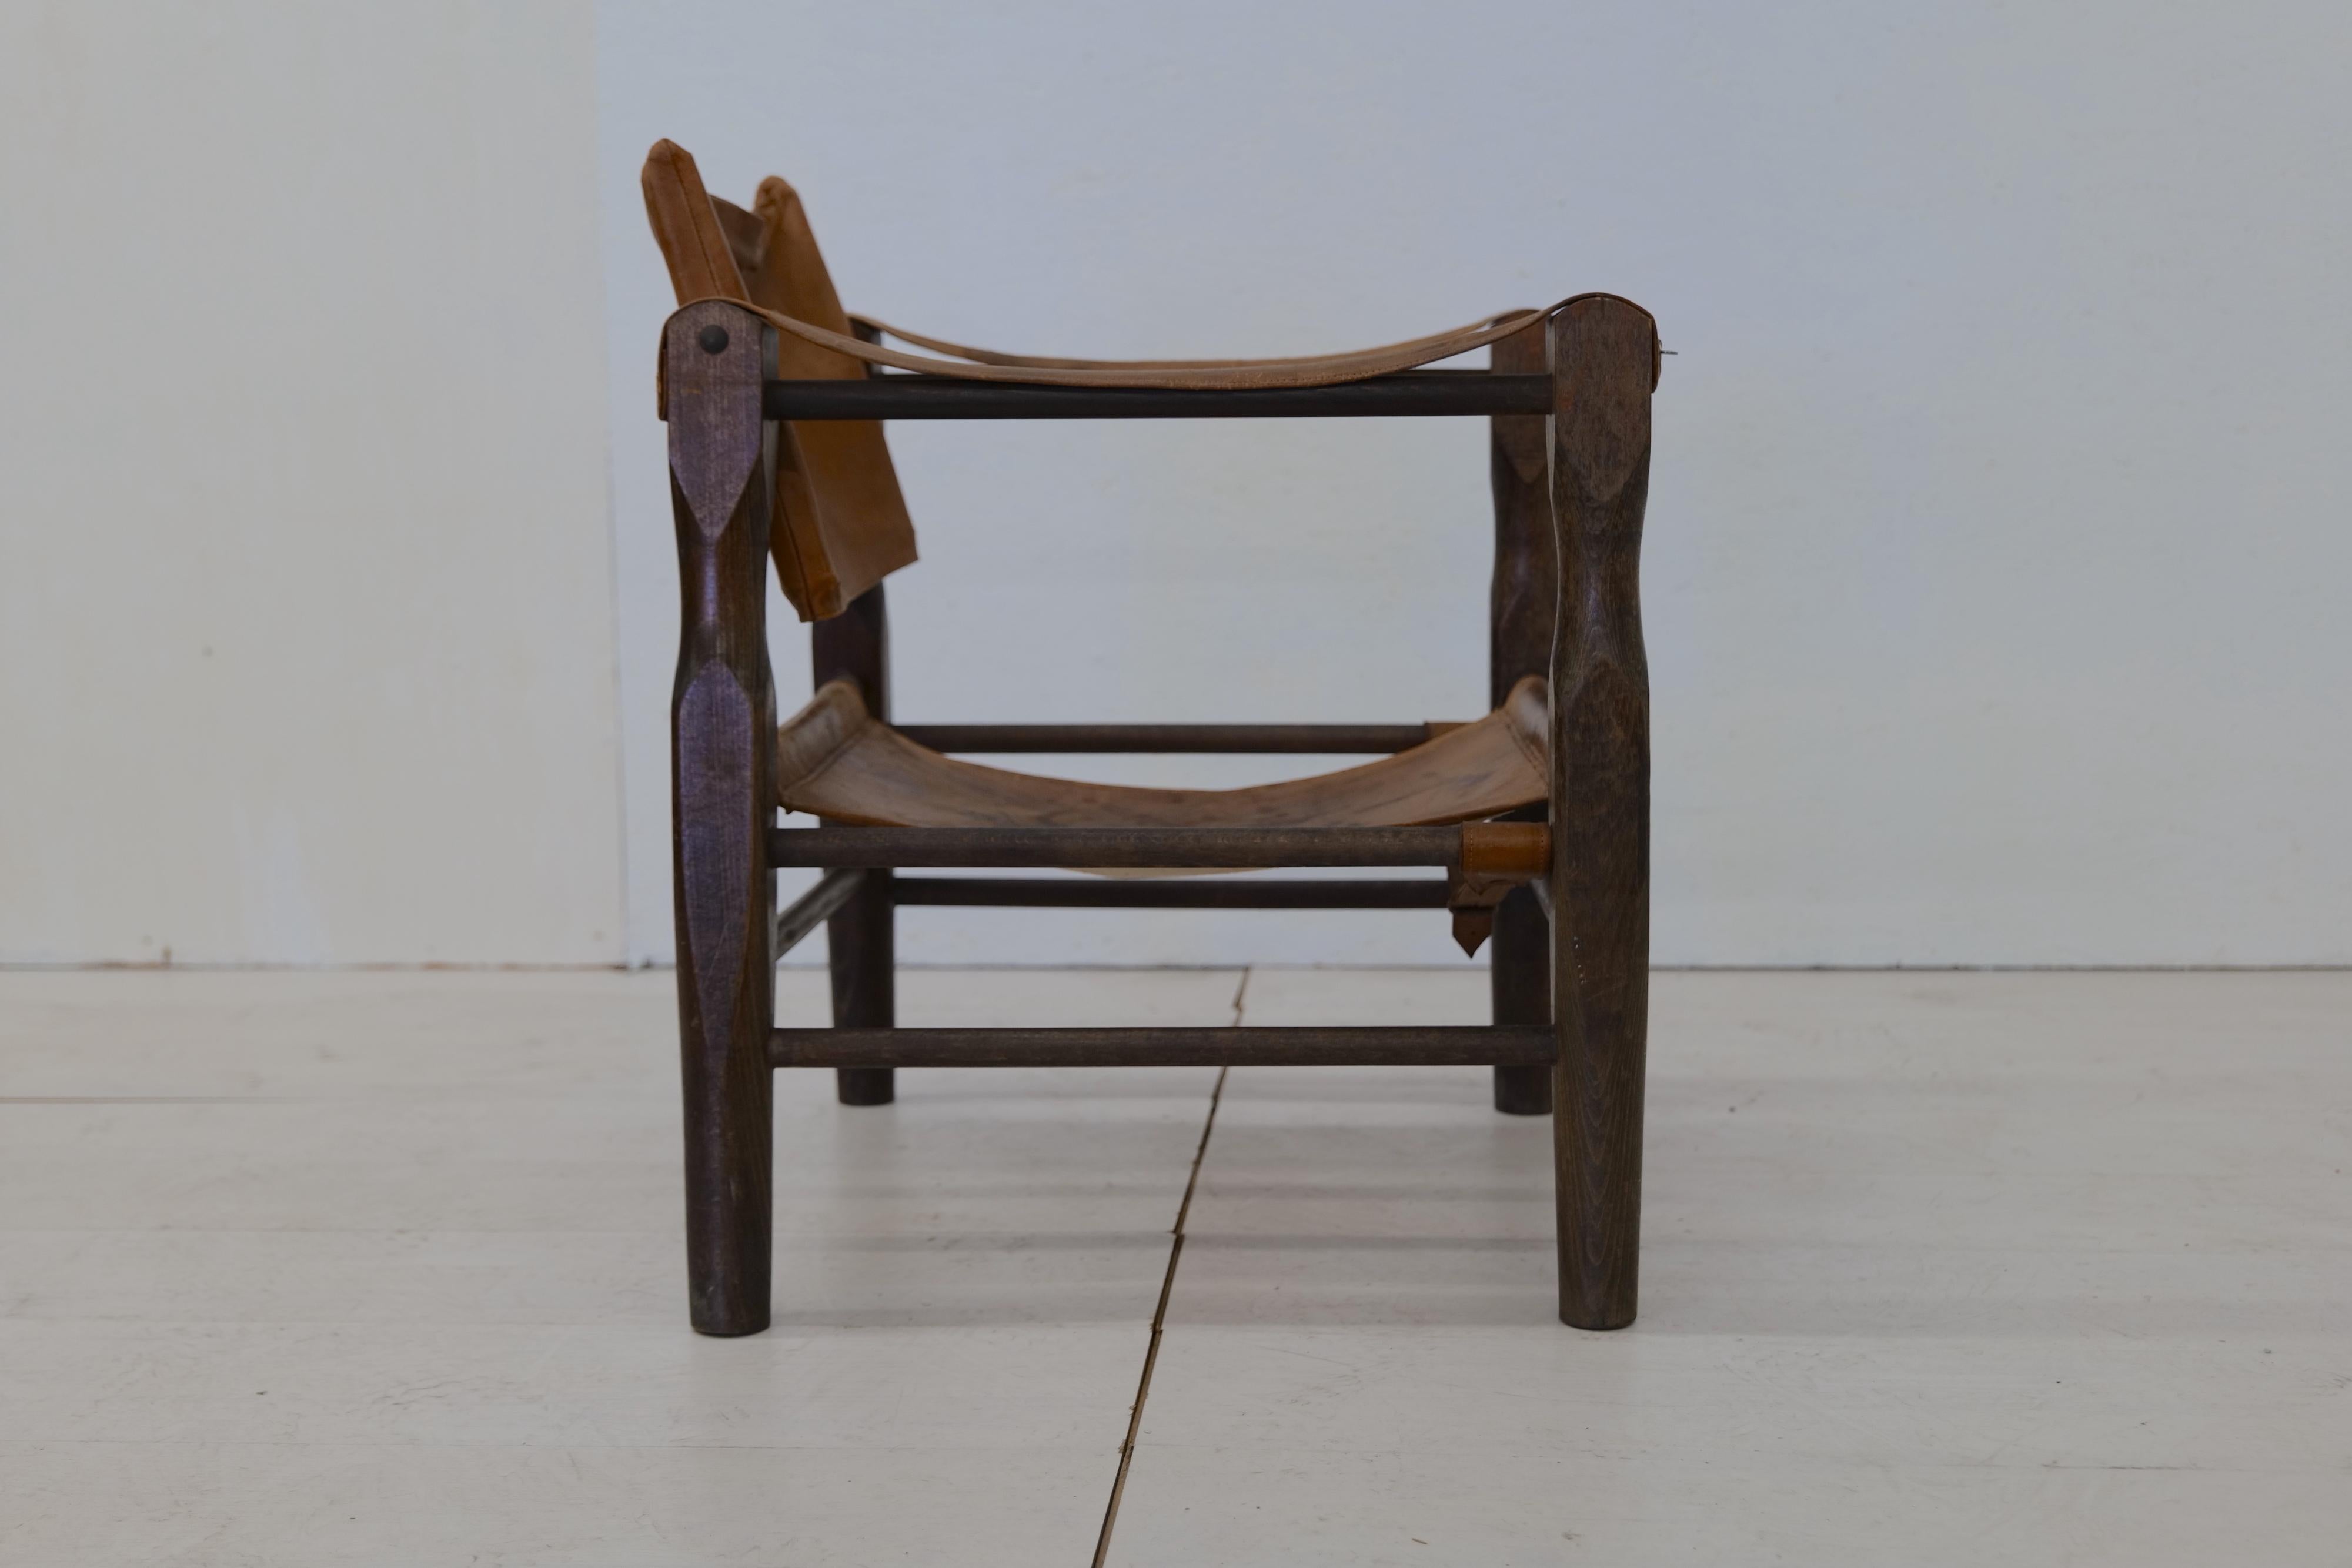 Vintage Italian Leather and Wood Safari Chair, 1970s For Sale 3